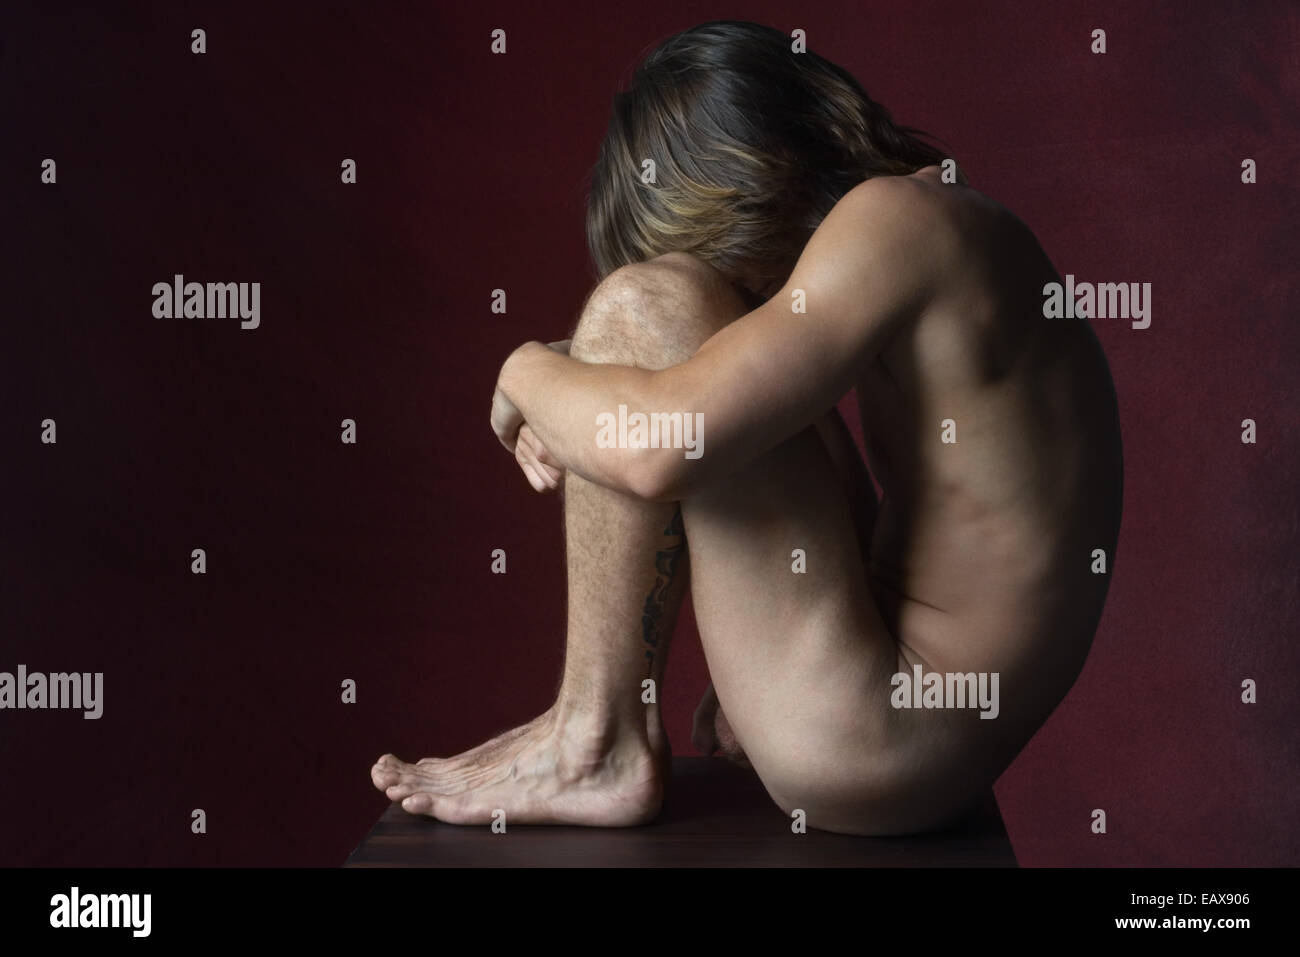 Nude man sitting in fetal position, side view Stock Photo